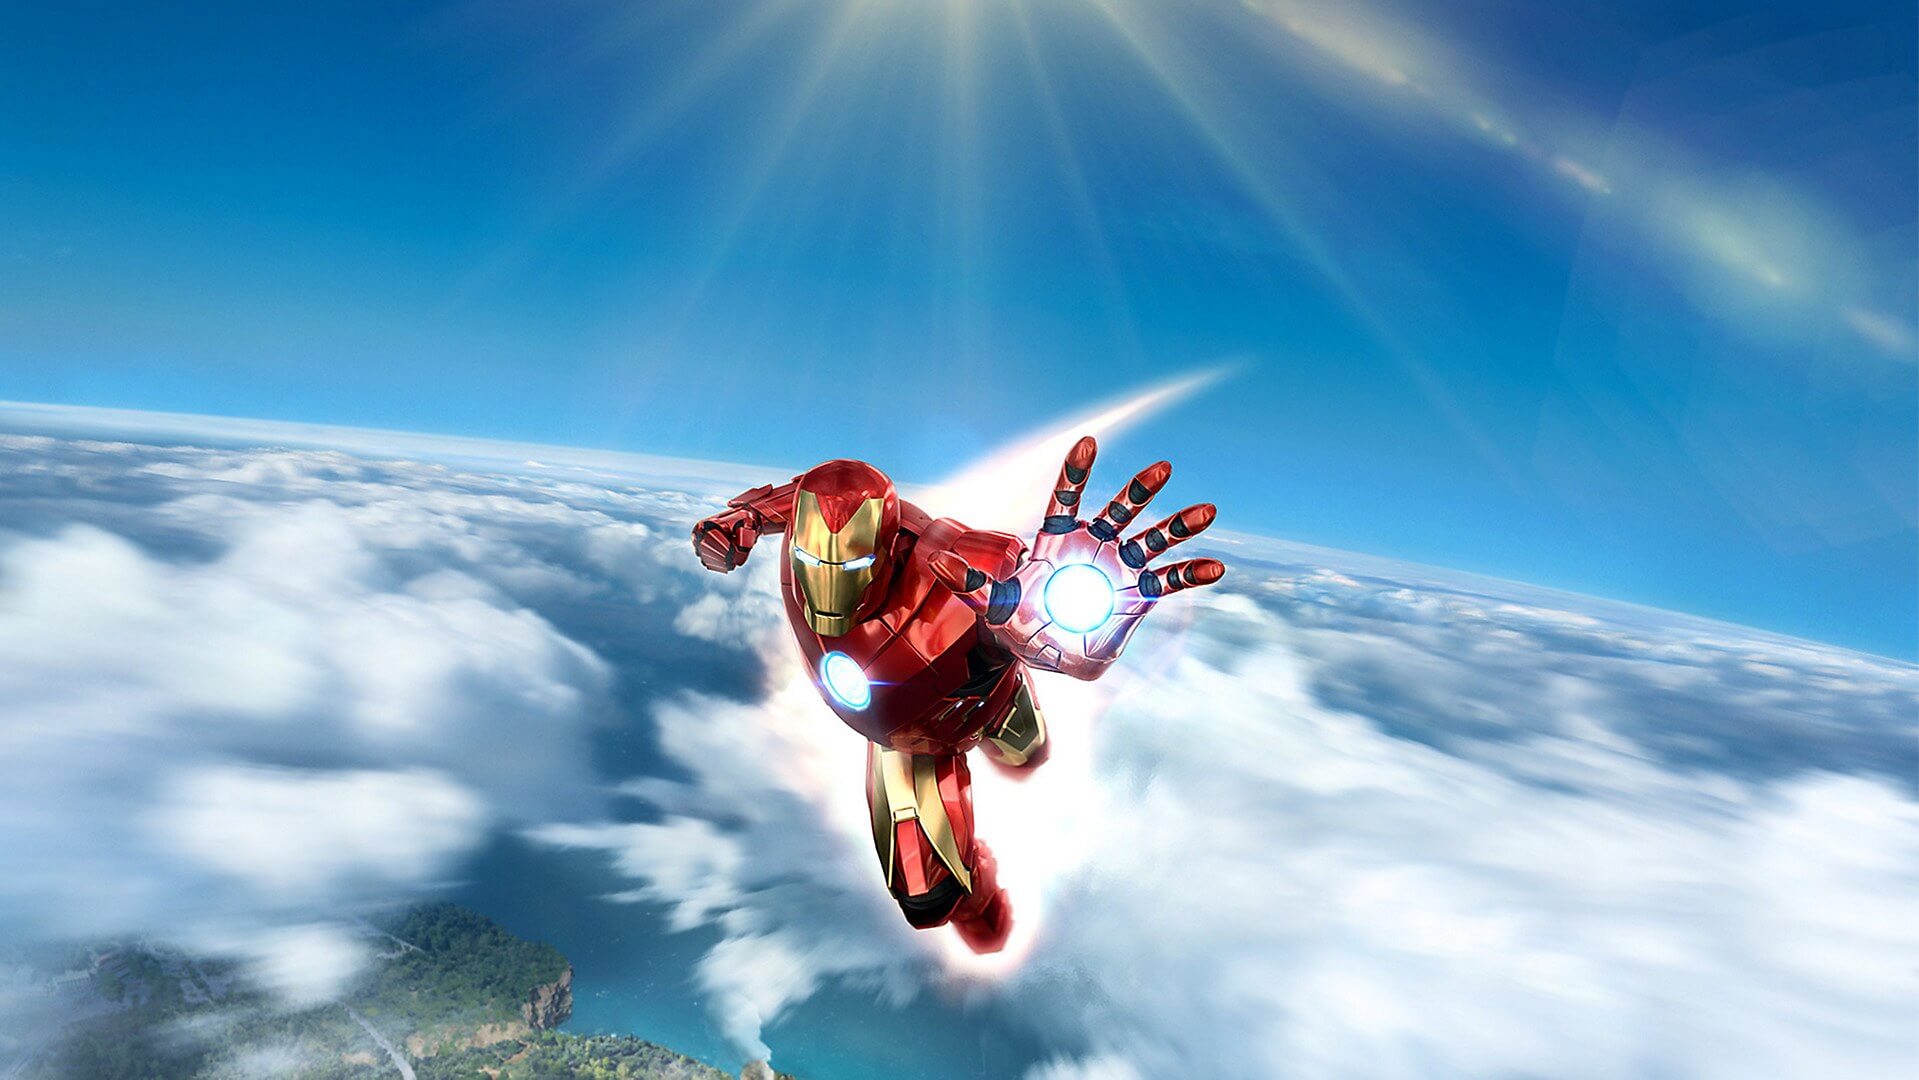 You can finally take to the skies in VR as Iron Man this Friday